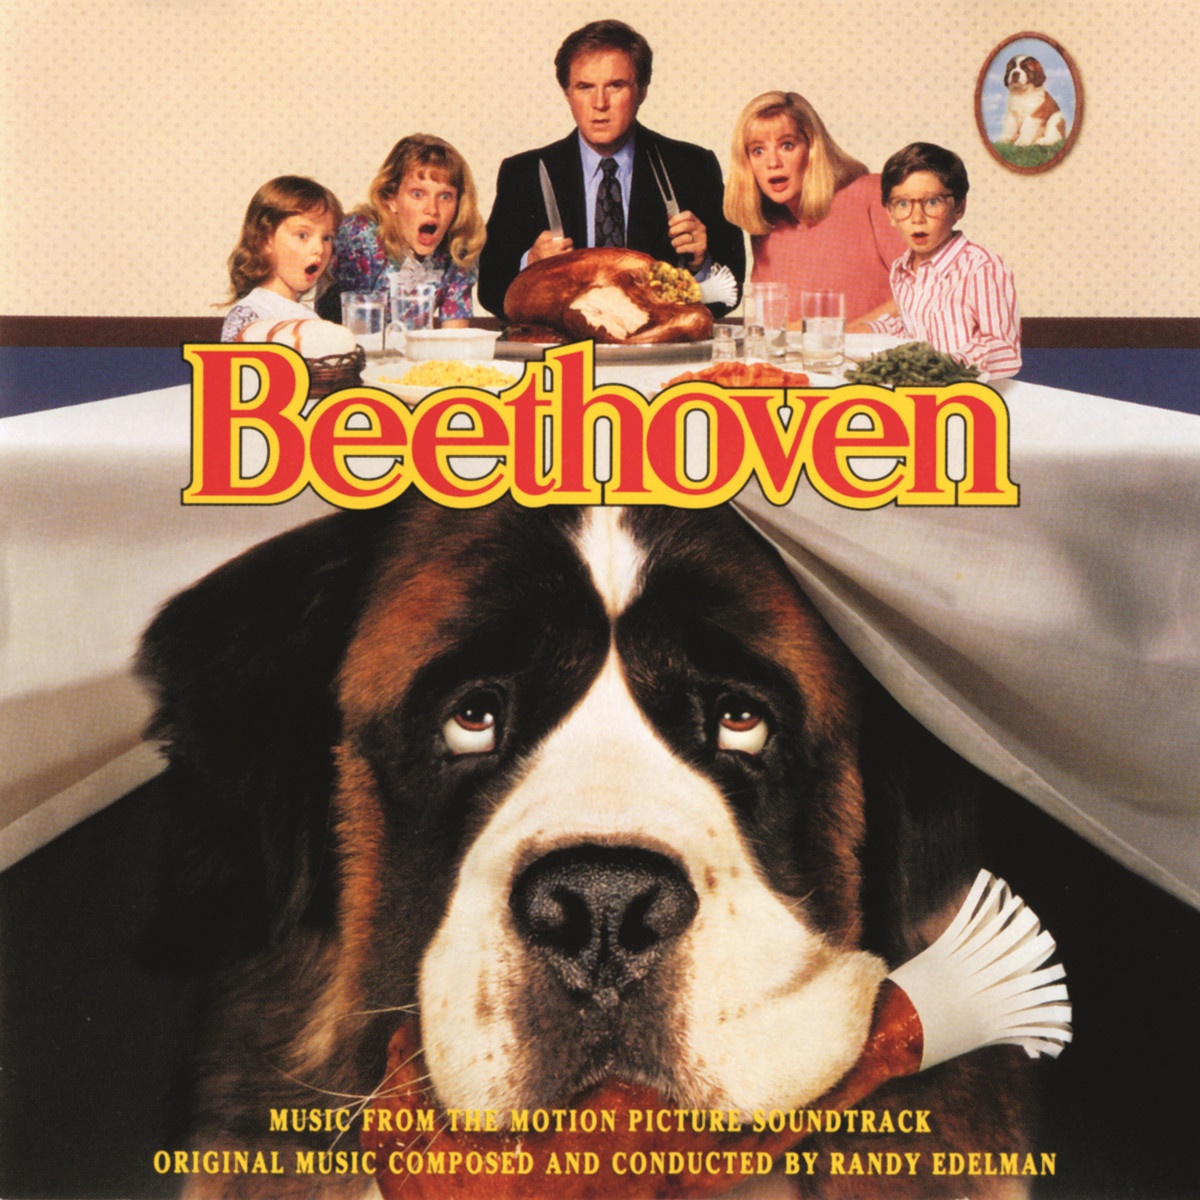 Beethoven to the Rescue